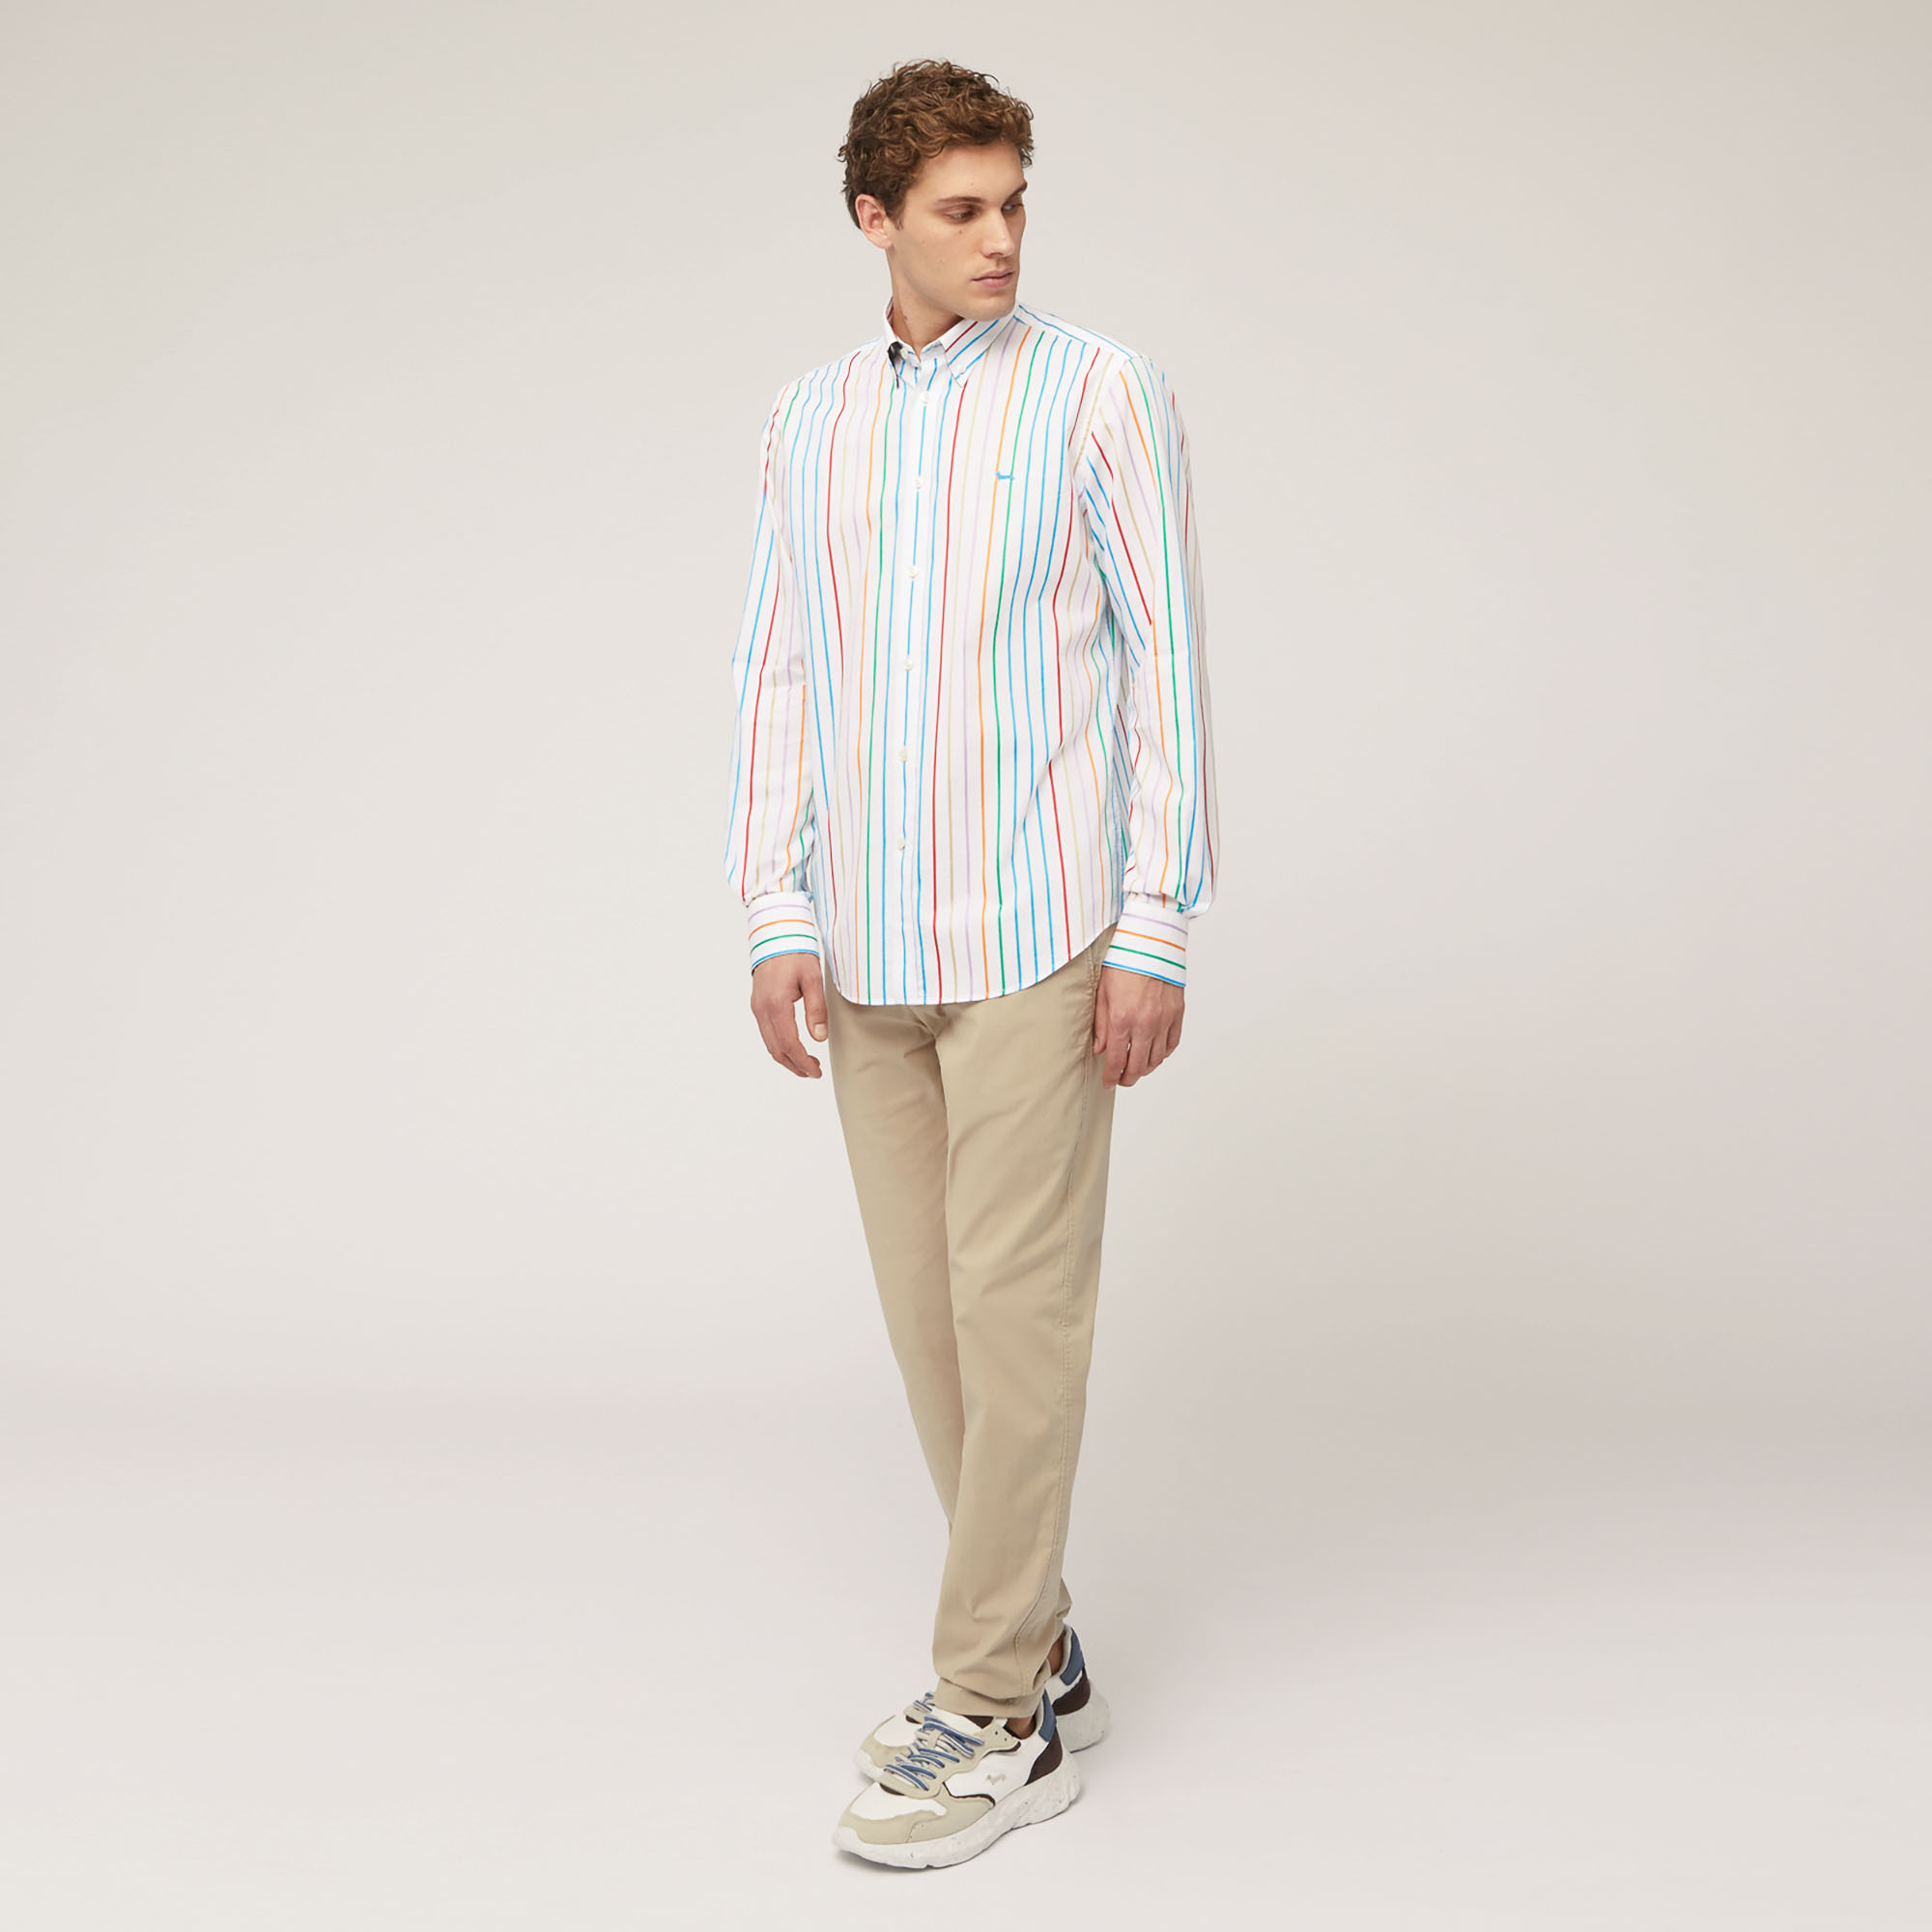 Multicolored-Stripe Cotton Shirt, White, large image number 3